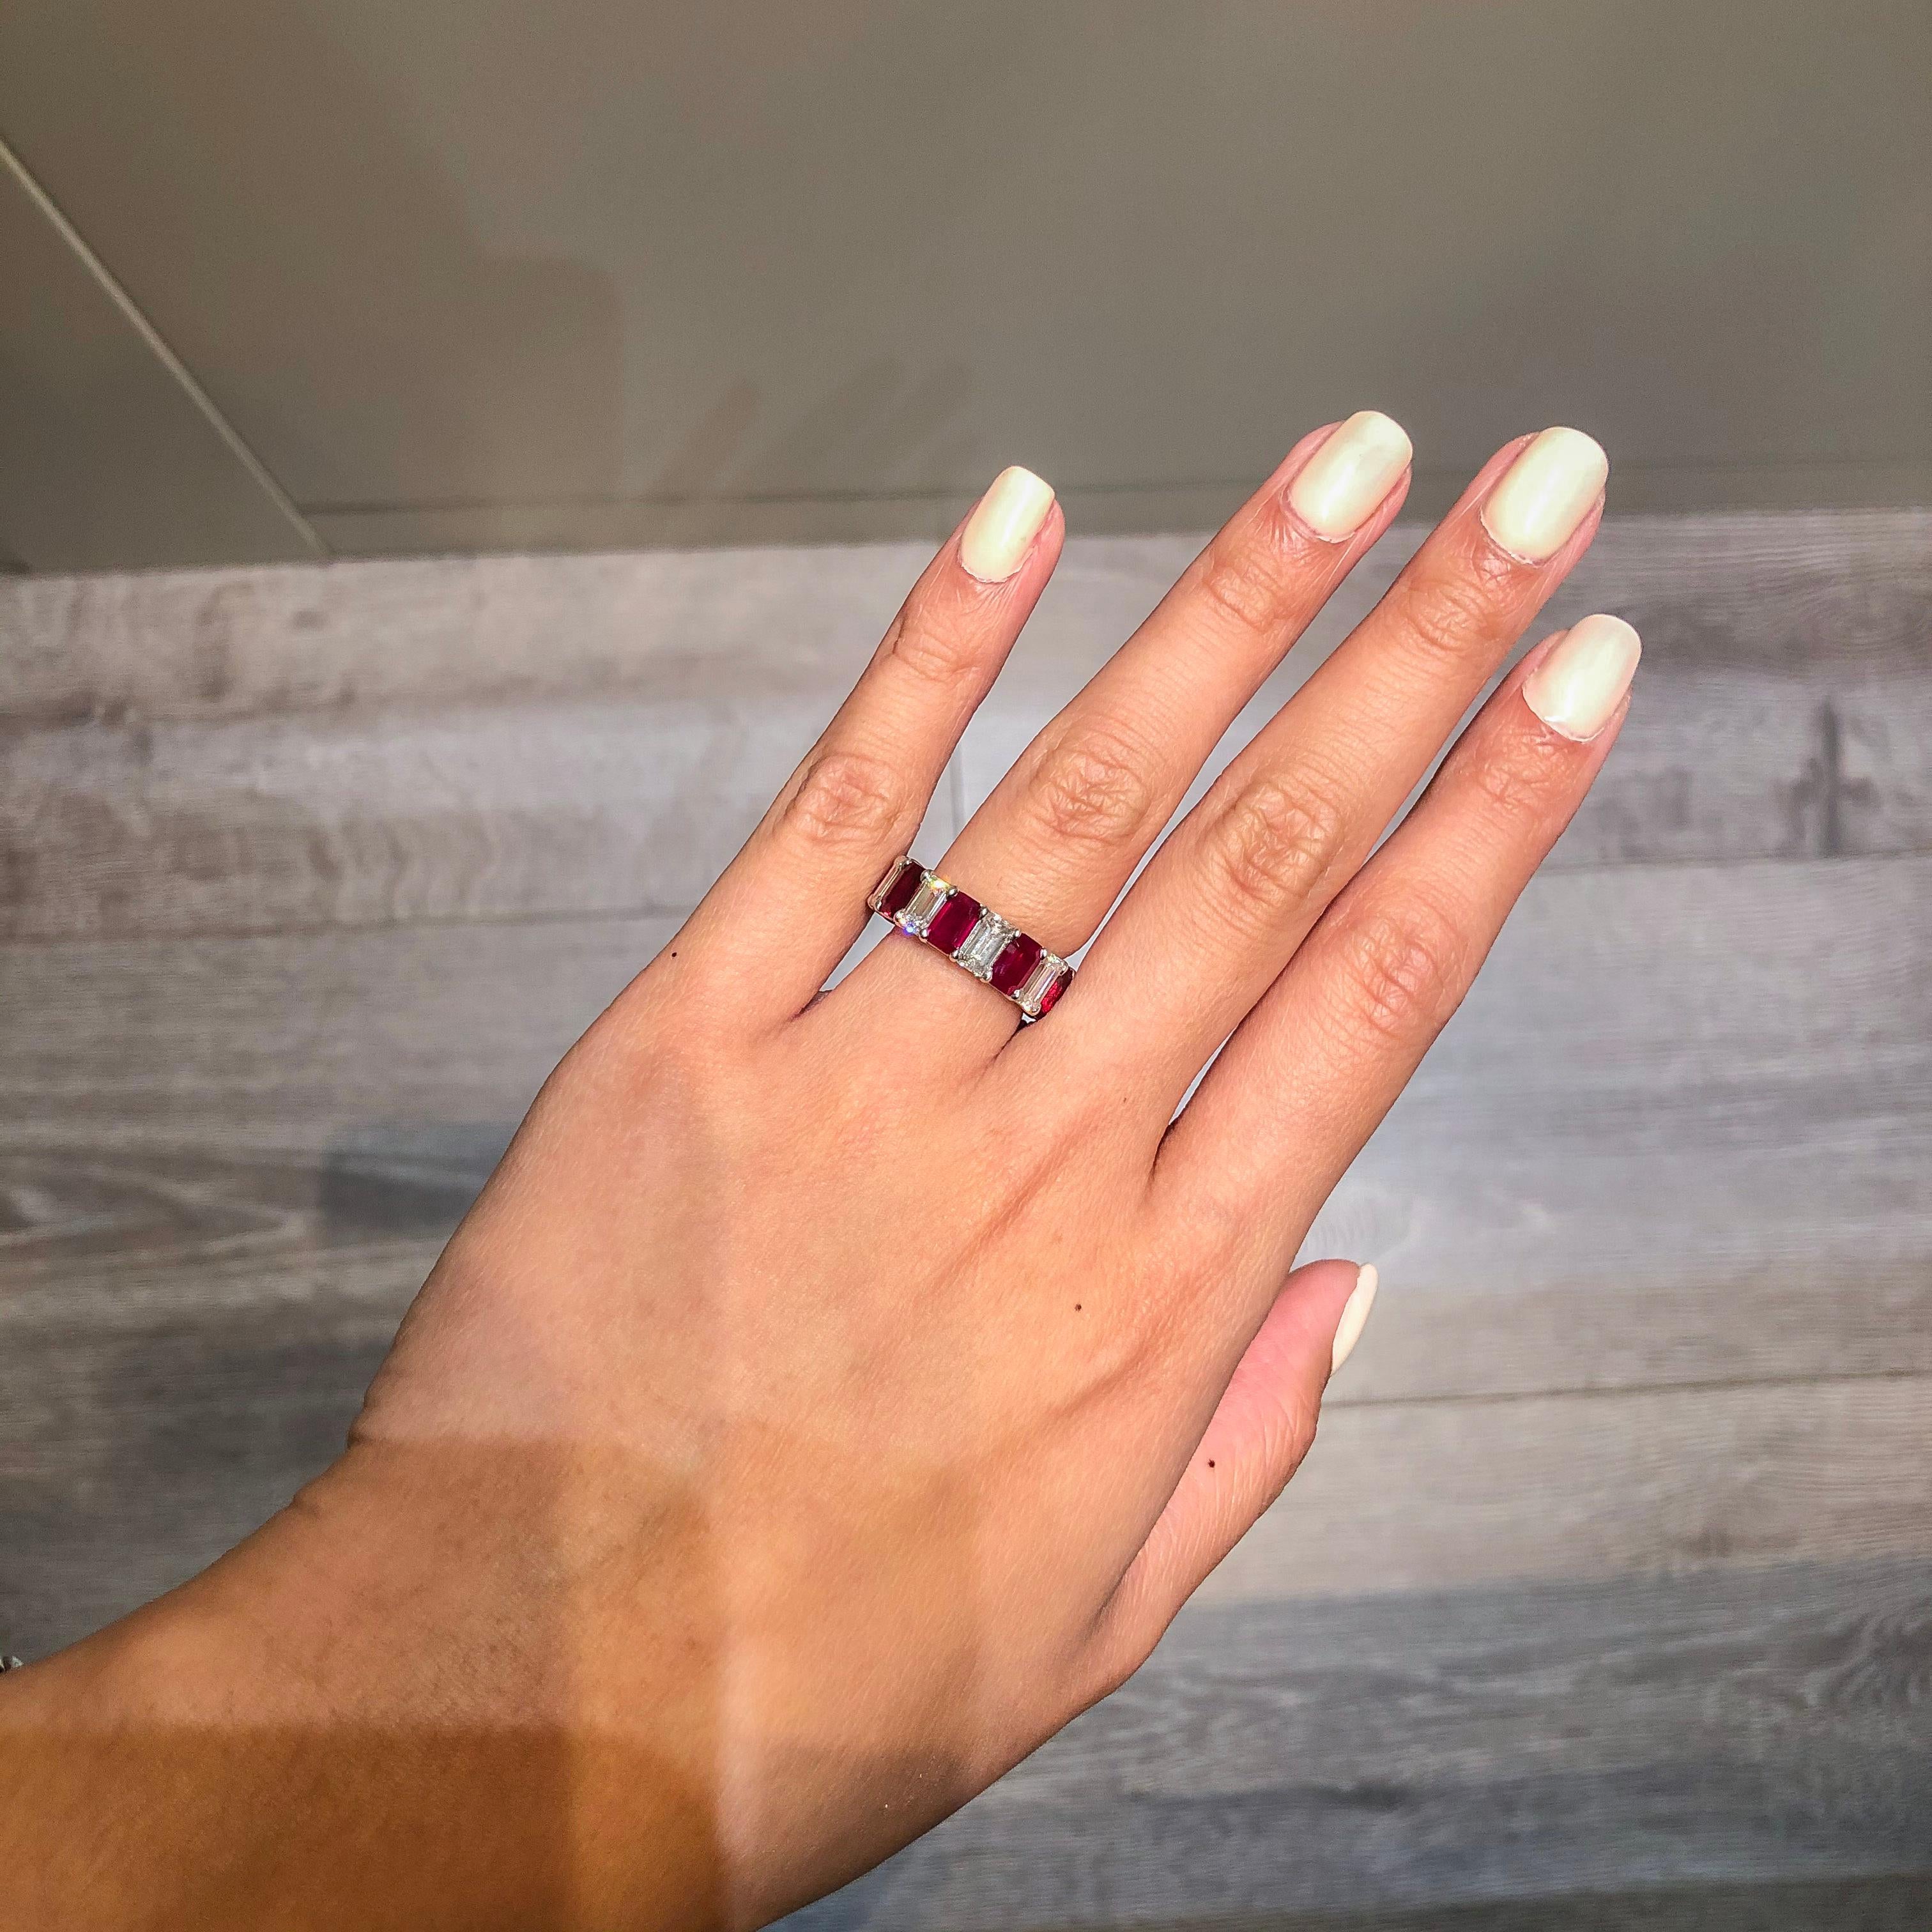 This gorgeous eternity band features 9 natural emerald cut rubies weighing 5.89 carats total that alternate with 9 emerald cut diamonds weighing 4.82 carats total. Set in an eternity style setting. Made with platinum. Approximate size is 6 (limited